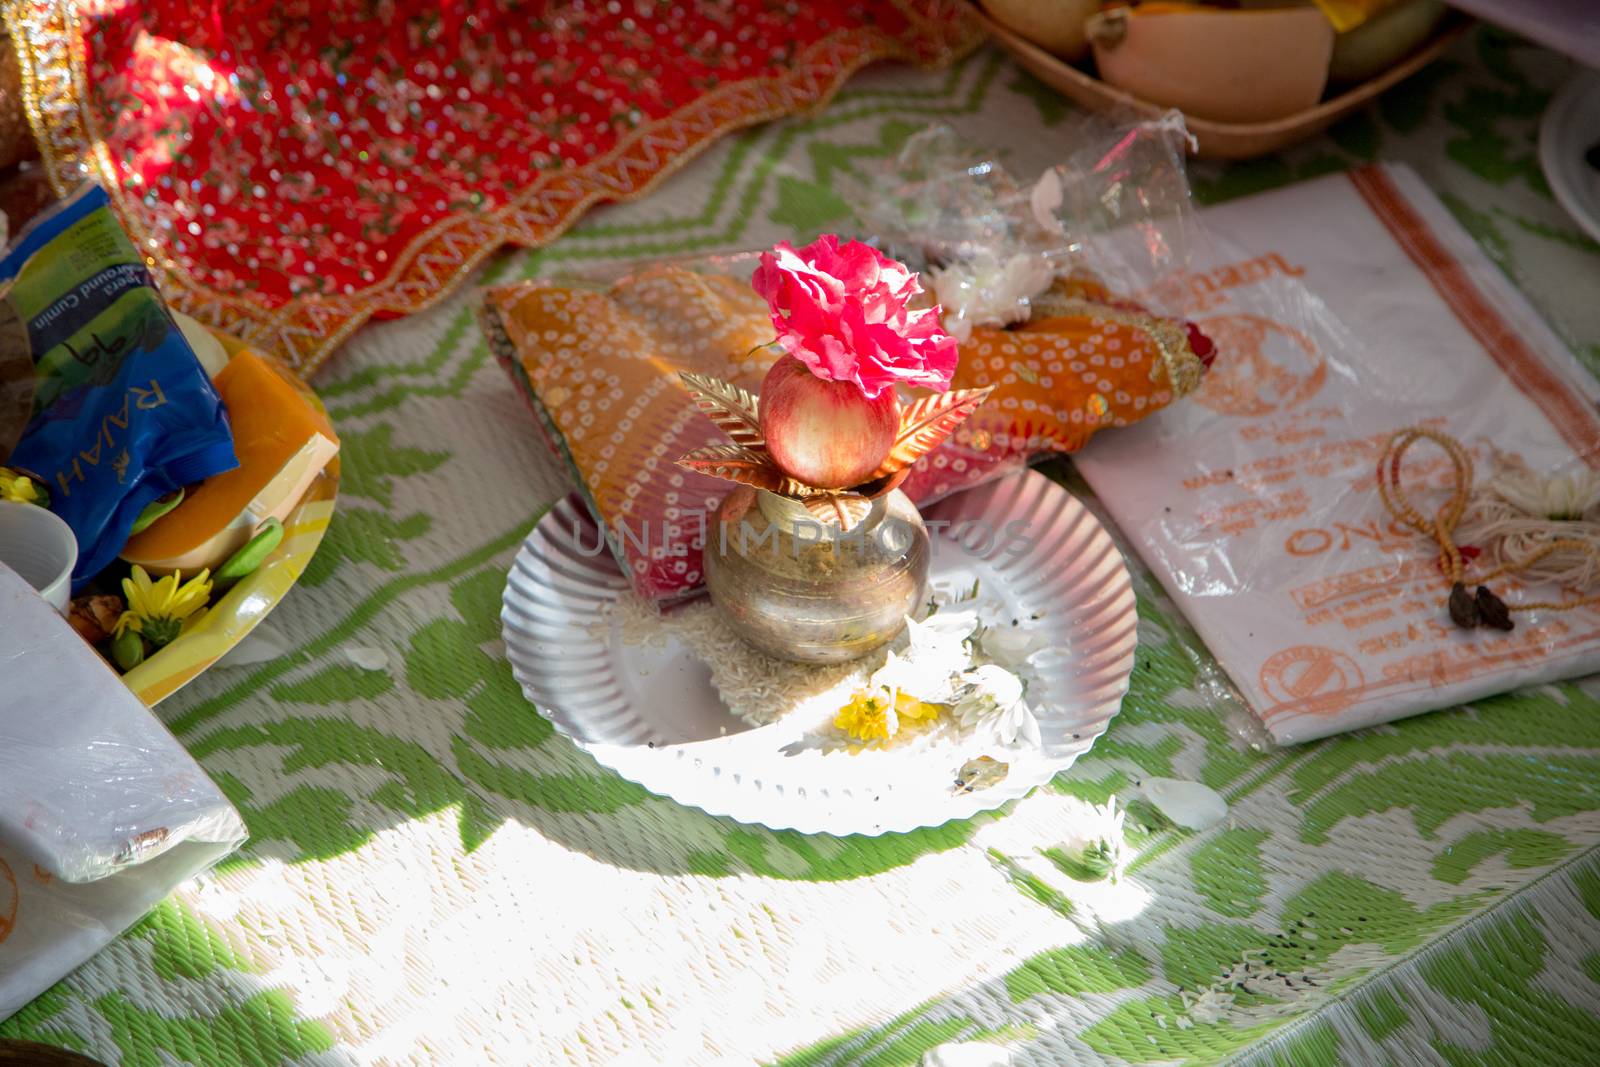 Food offering during an Indian wedding by camerarules